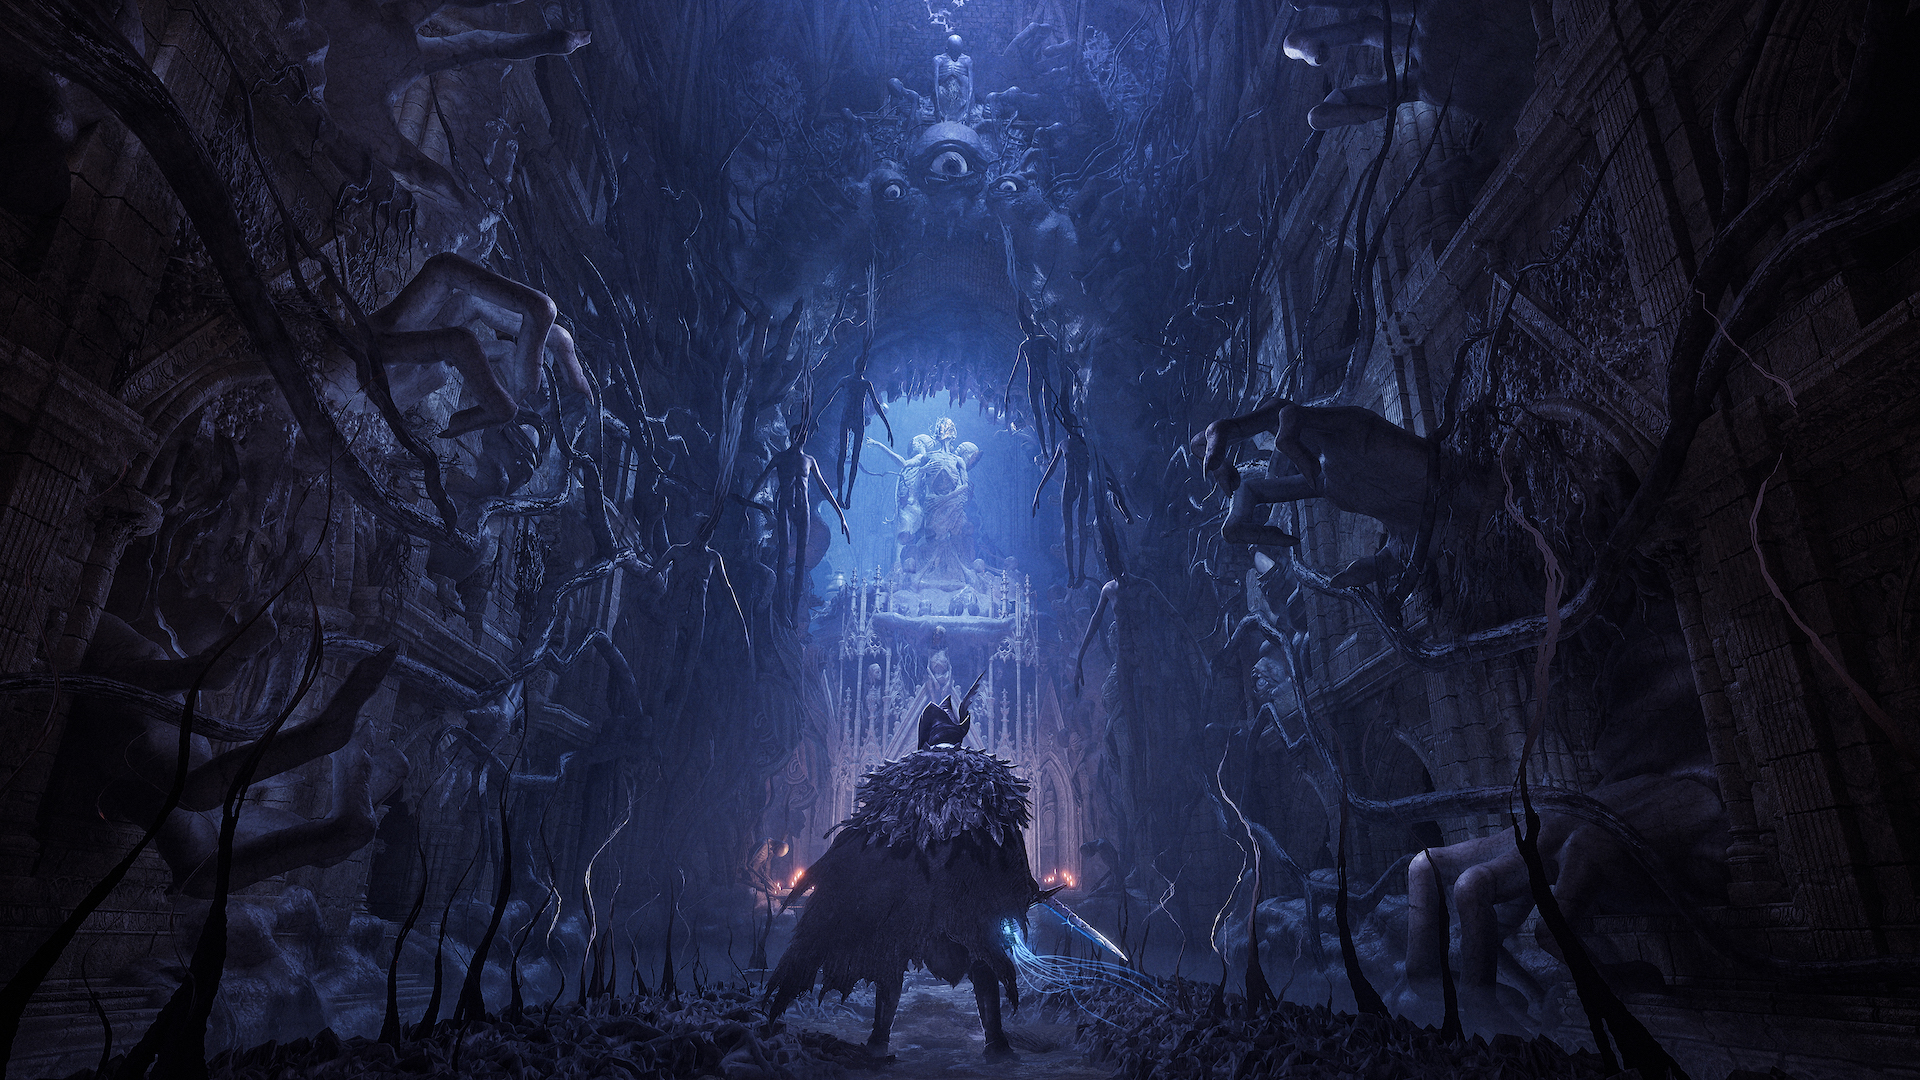 Lords of the Fallen will let you bring “the bulky horror of your dreams” to life